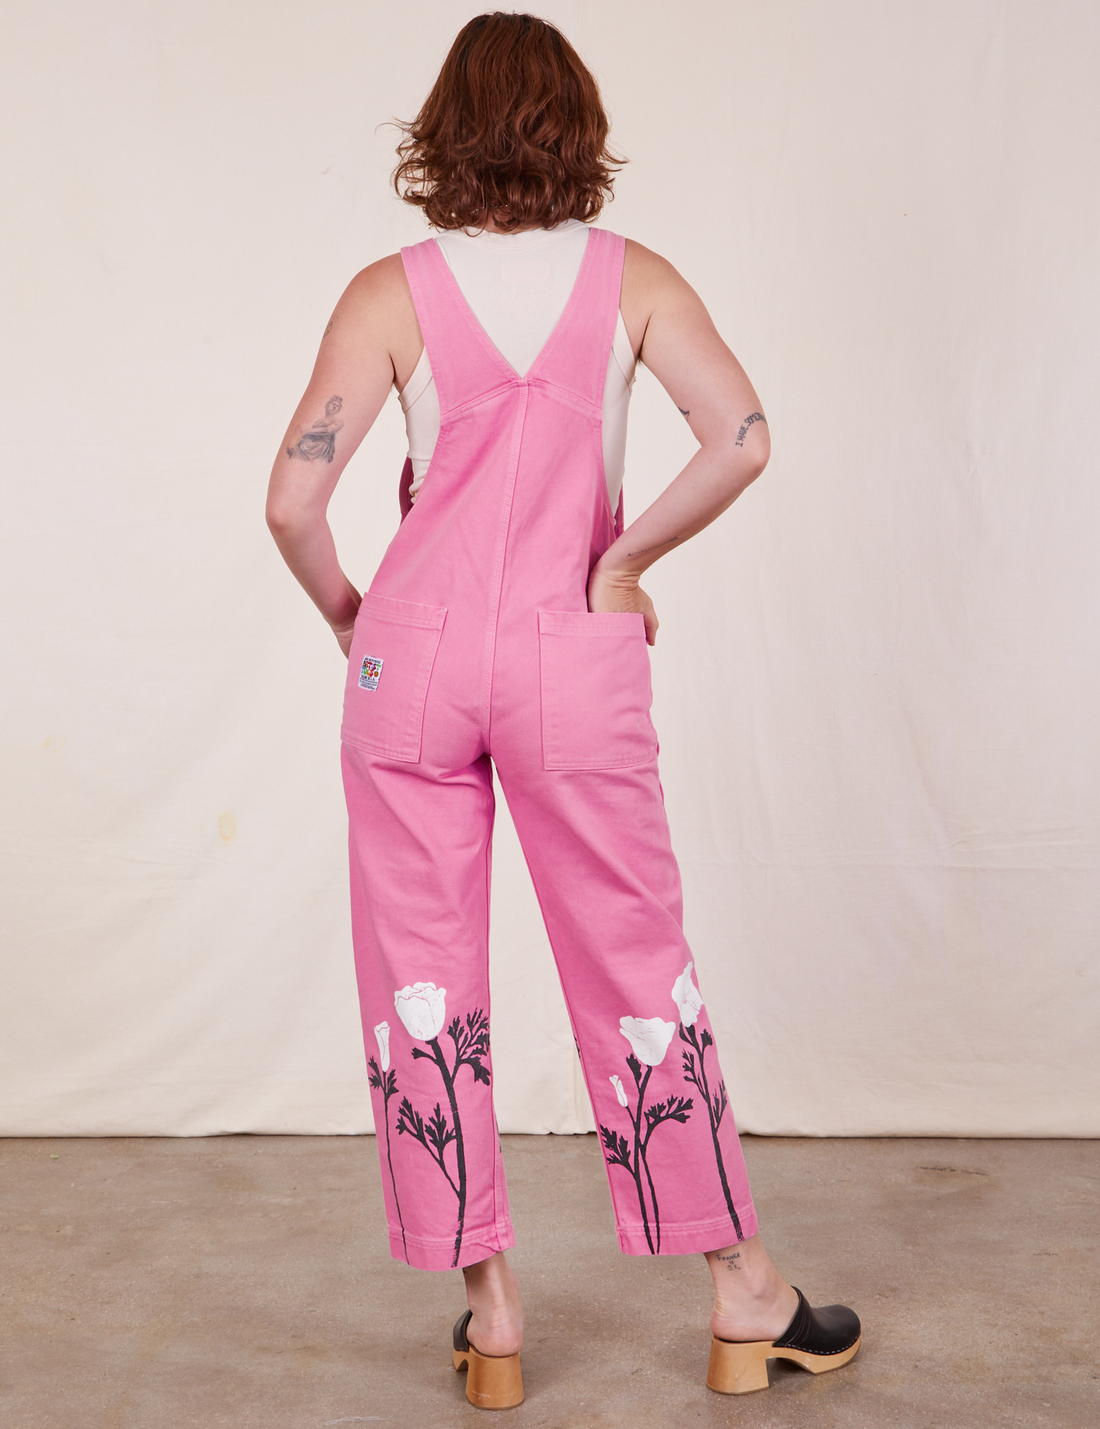 Back view of California Poppy Overalls in Bubblegum Pink and vintage off-white Tank Top underneath. Alex has one hand tucked into the back pocket.